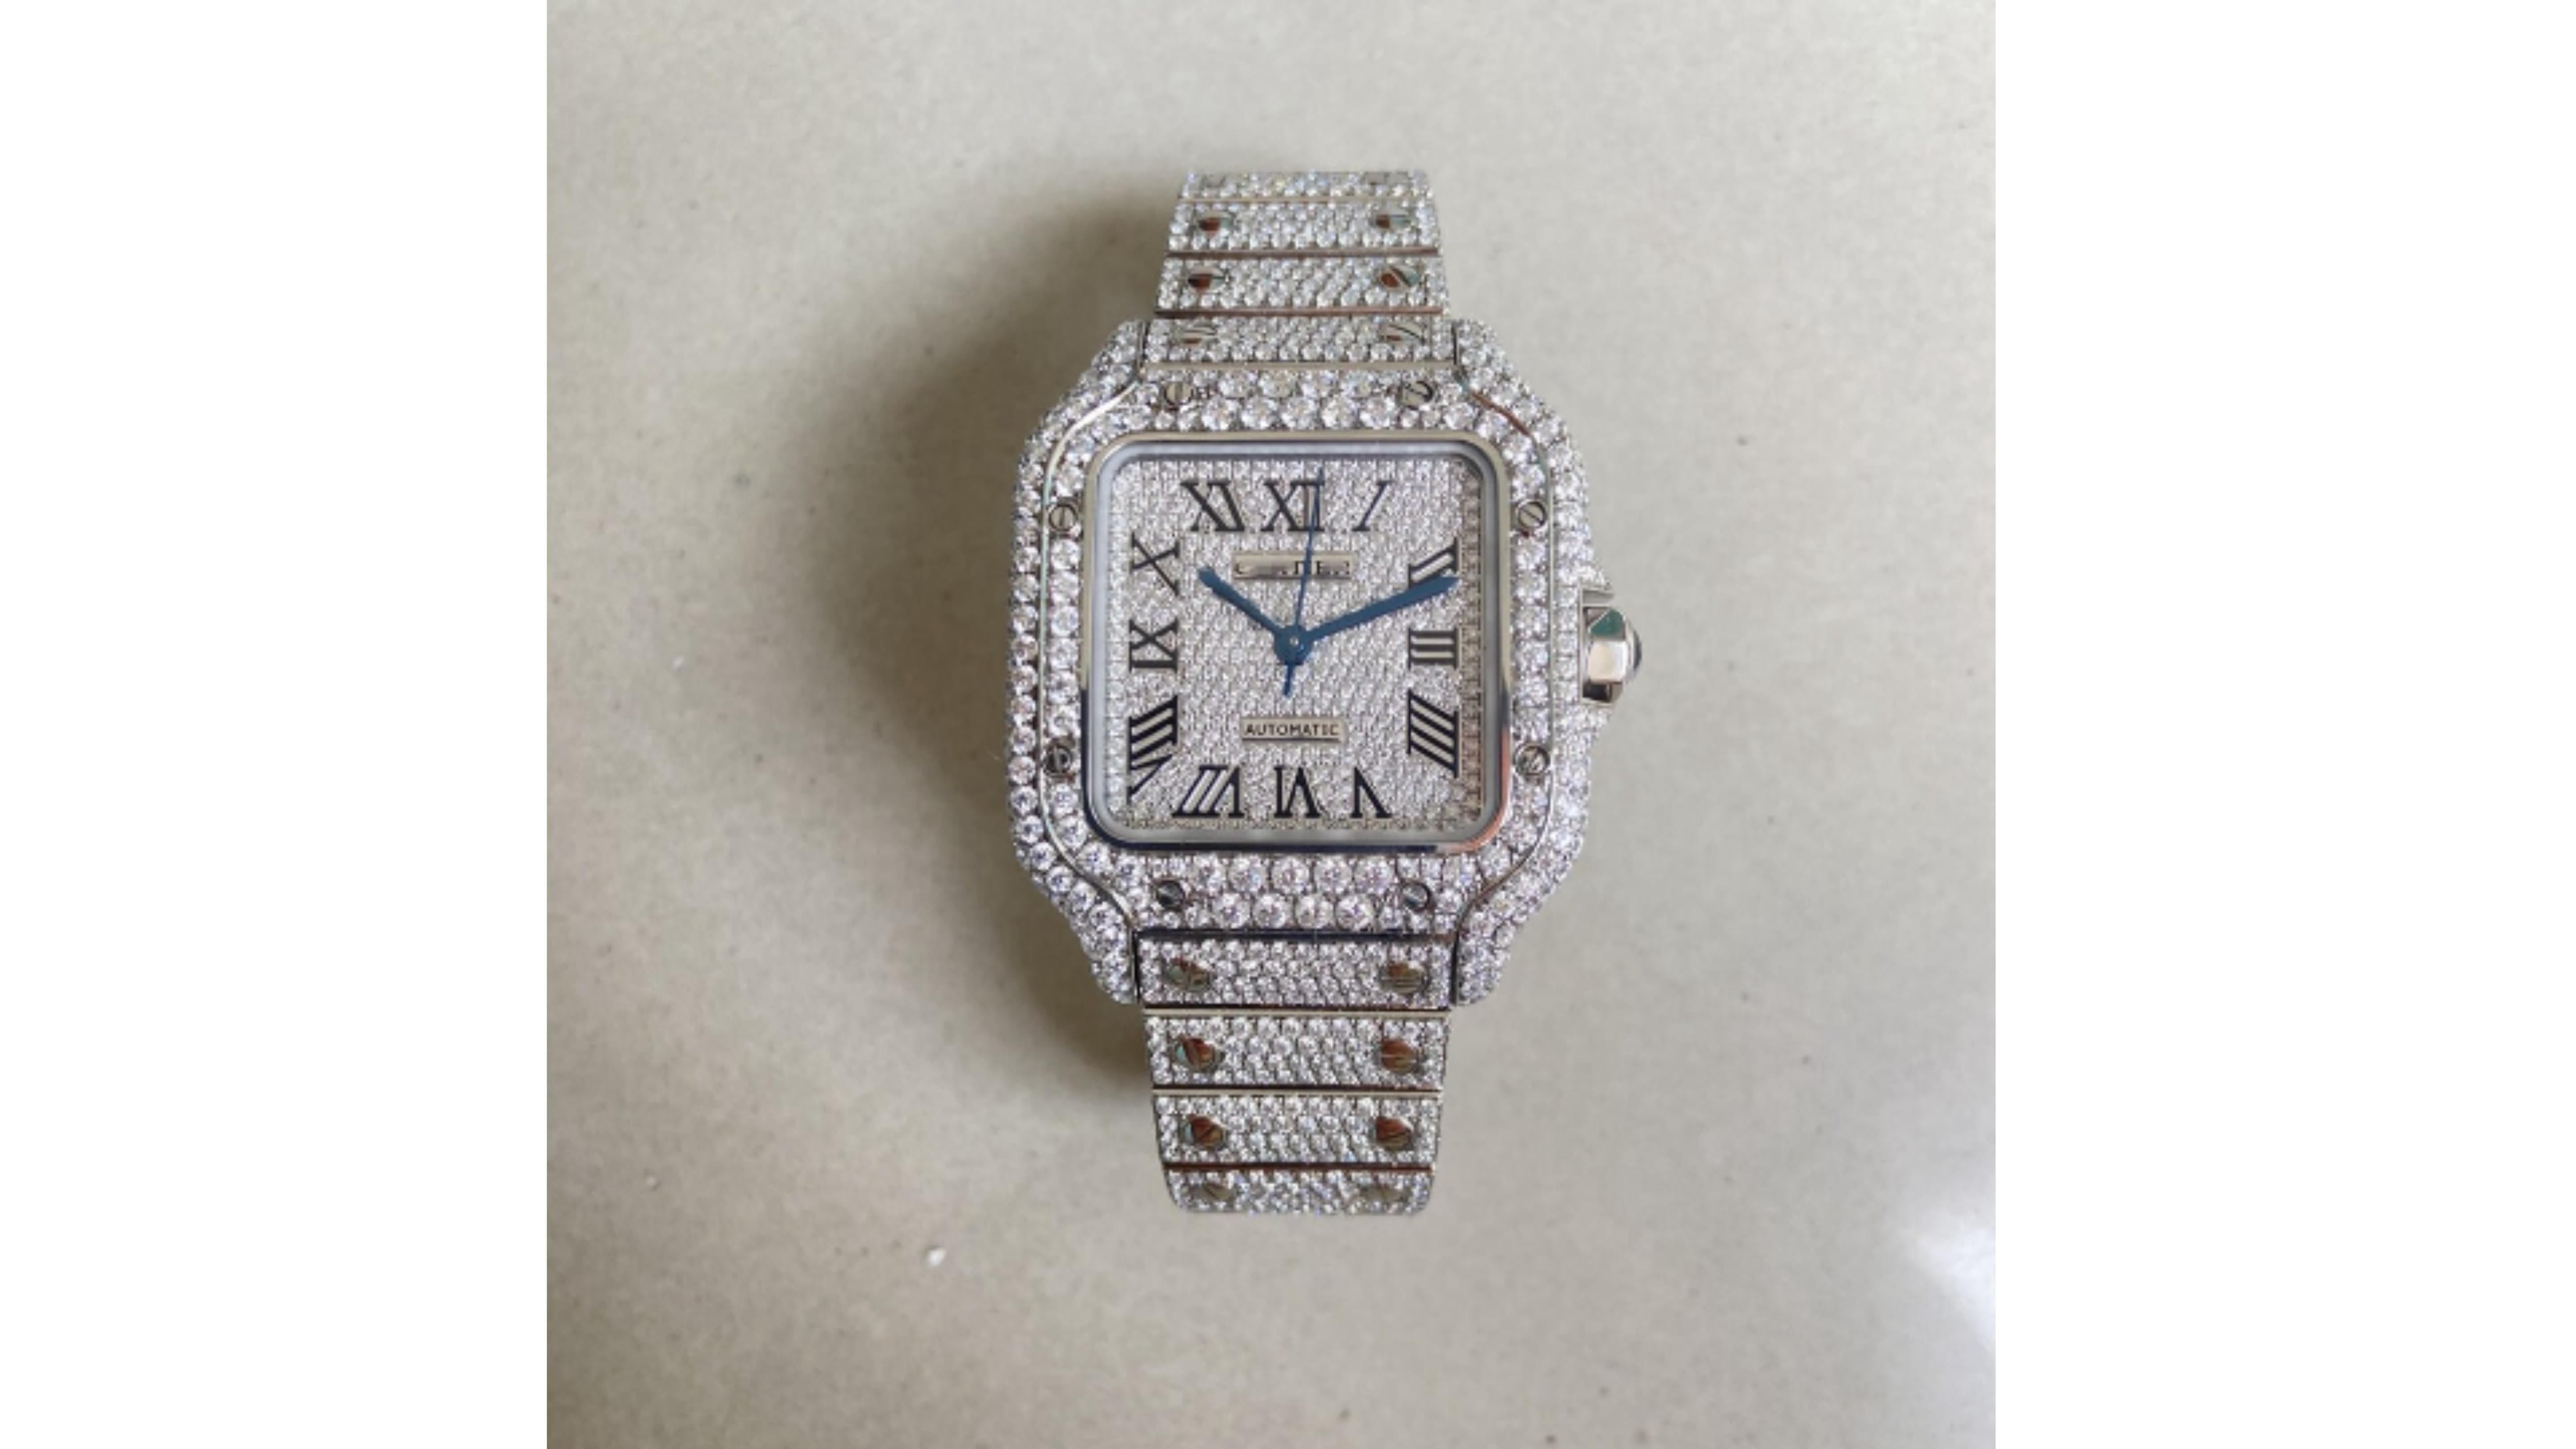 Mens Moissanite Diamond Watch Swiss Movement


These are custom Moissanite watches and photos show a silver and one with gold too.    You can have real diamonds if you wish too and are all swiss movement and in stainless steel 

The one you see in